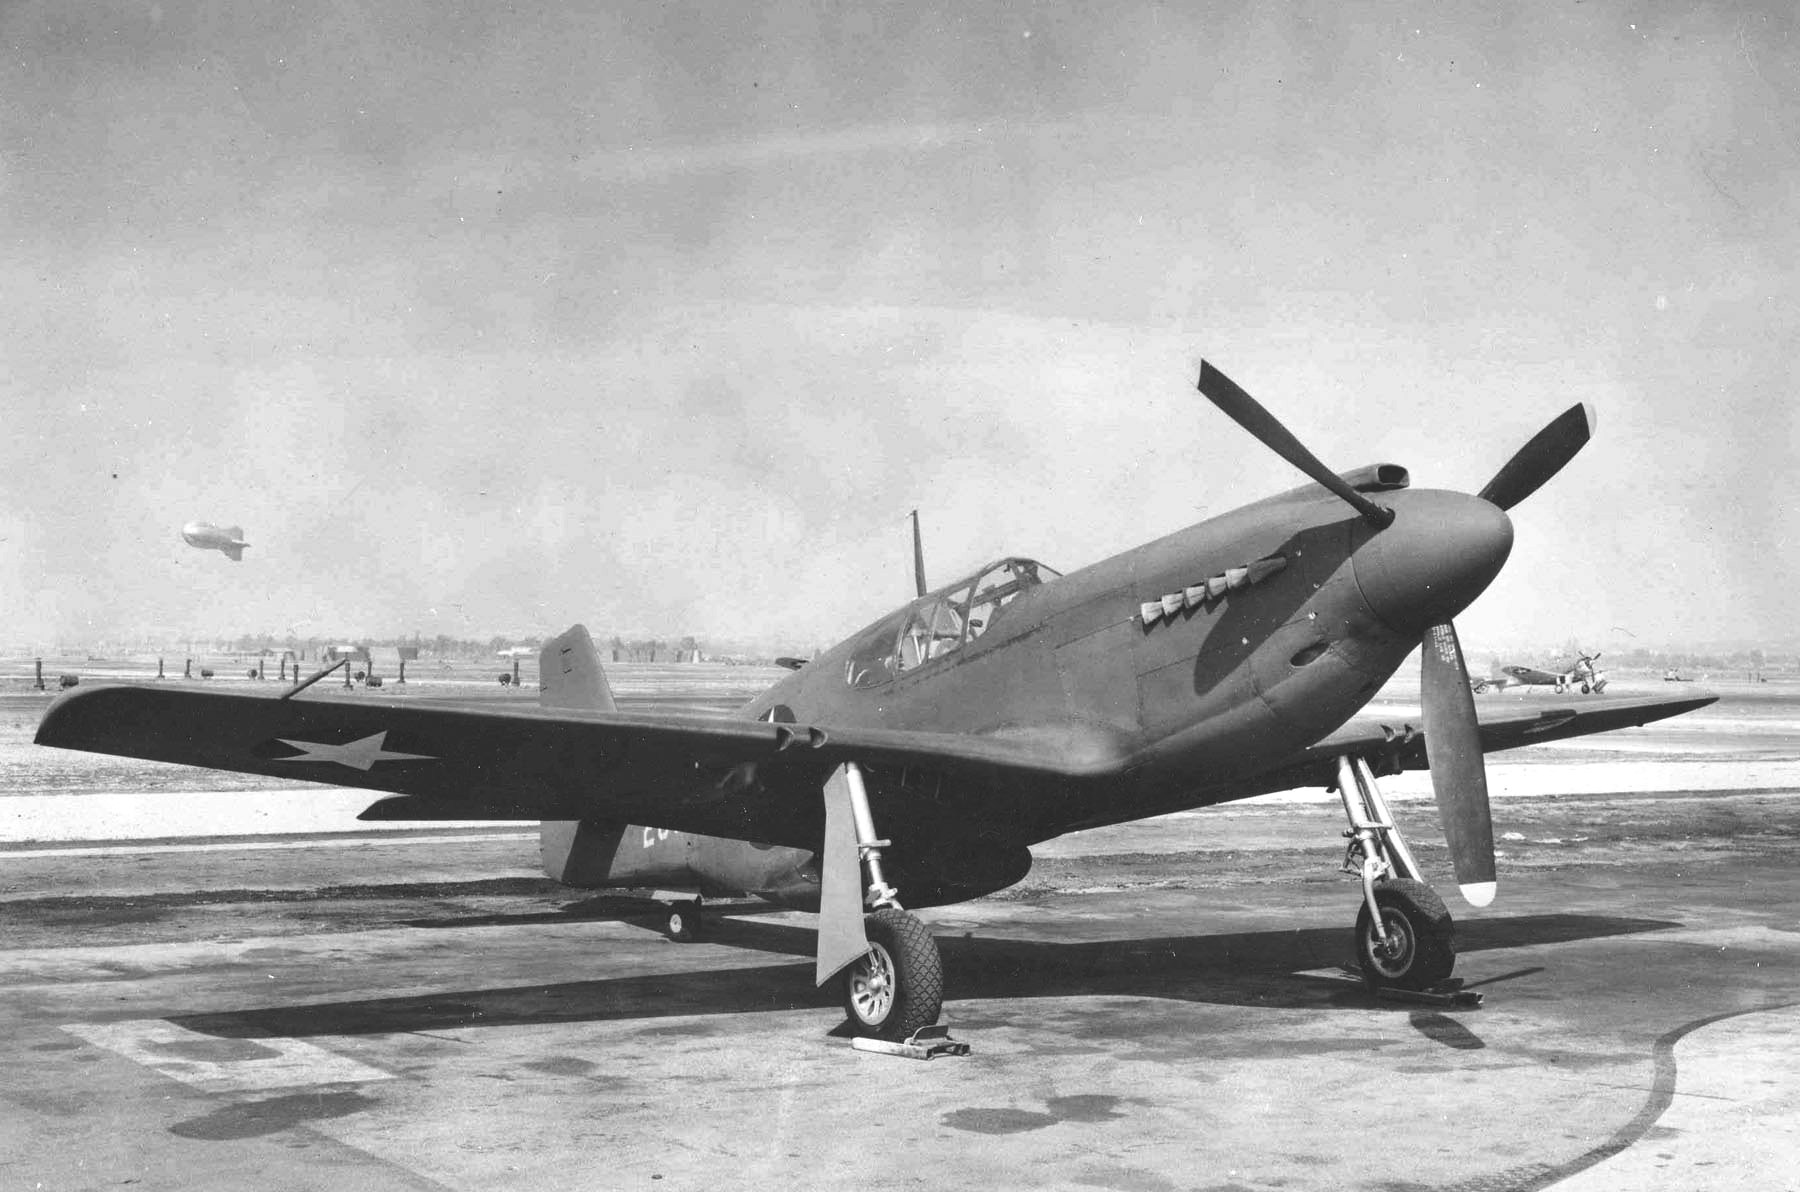 A-36A Mustang aircraft #42-83663, probably at North American Aviation plant at Inglewood, California, United States, 1942. Photo 1 of 2